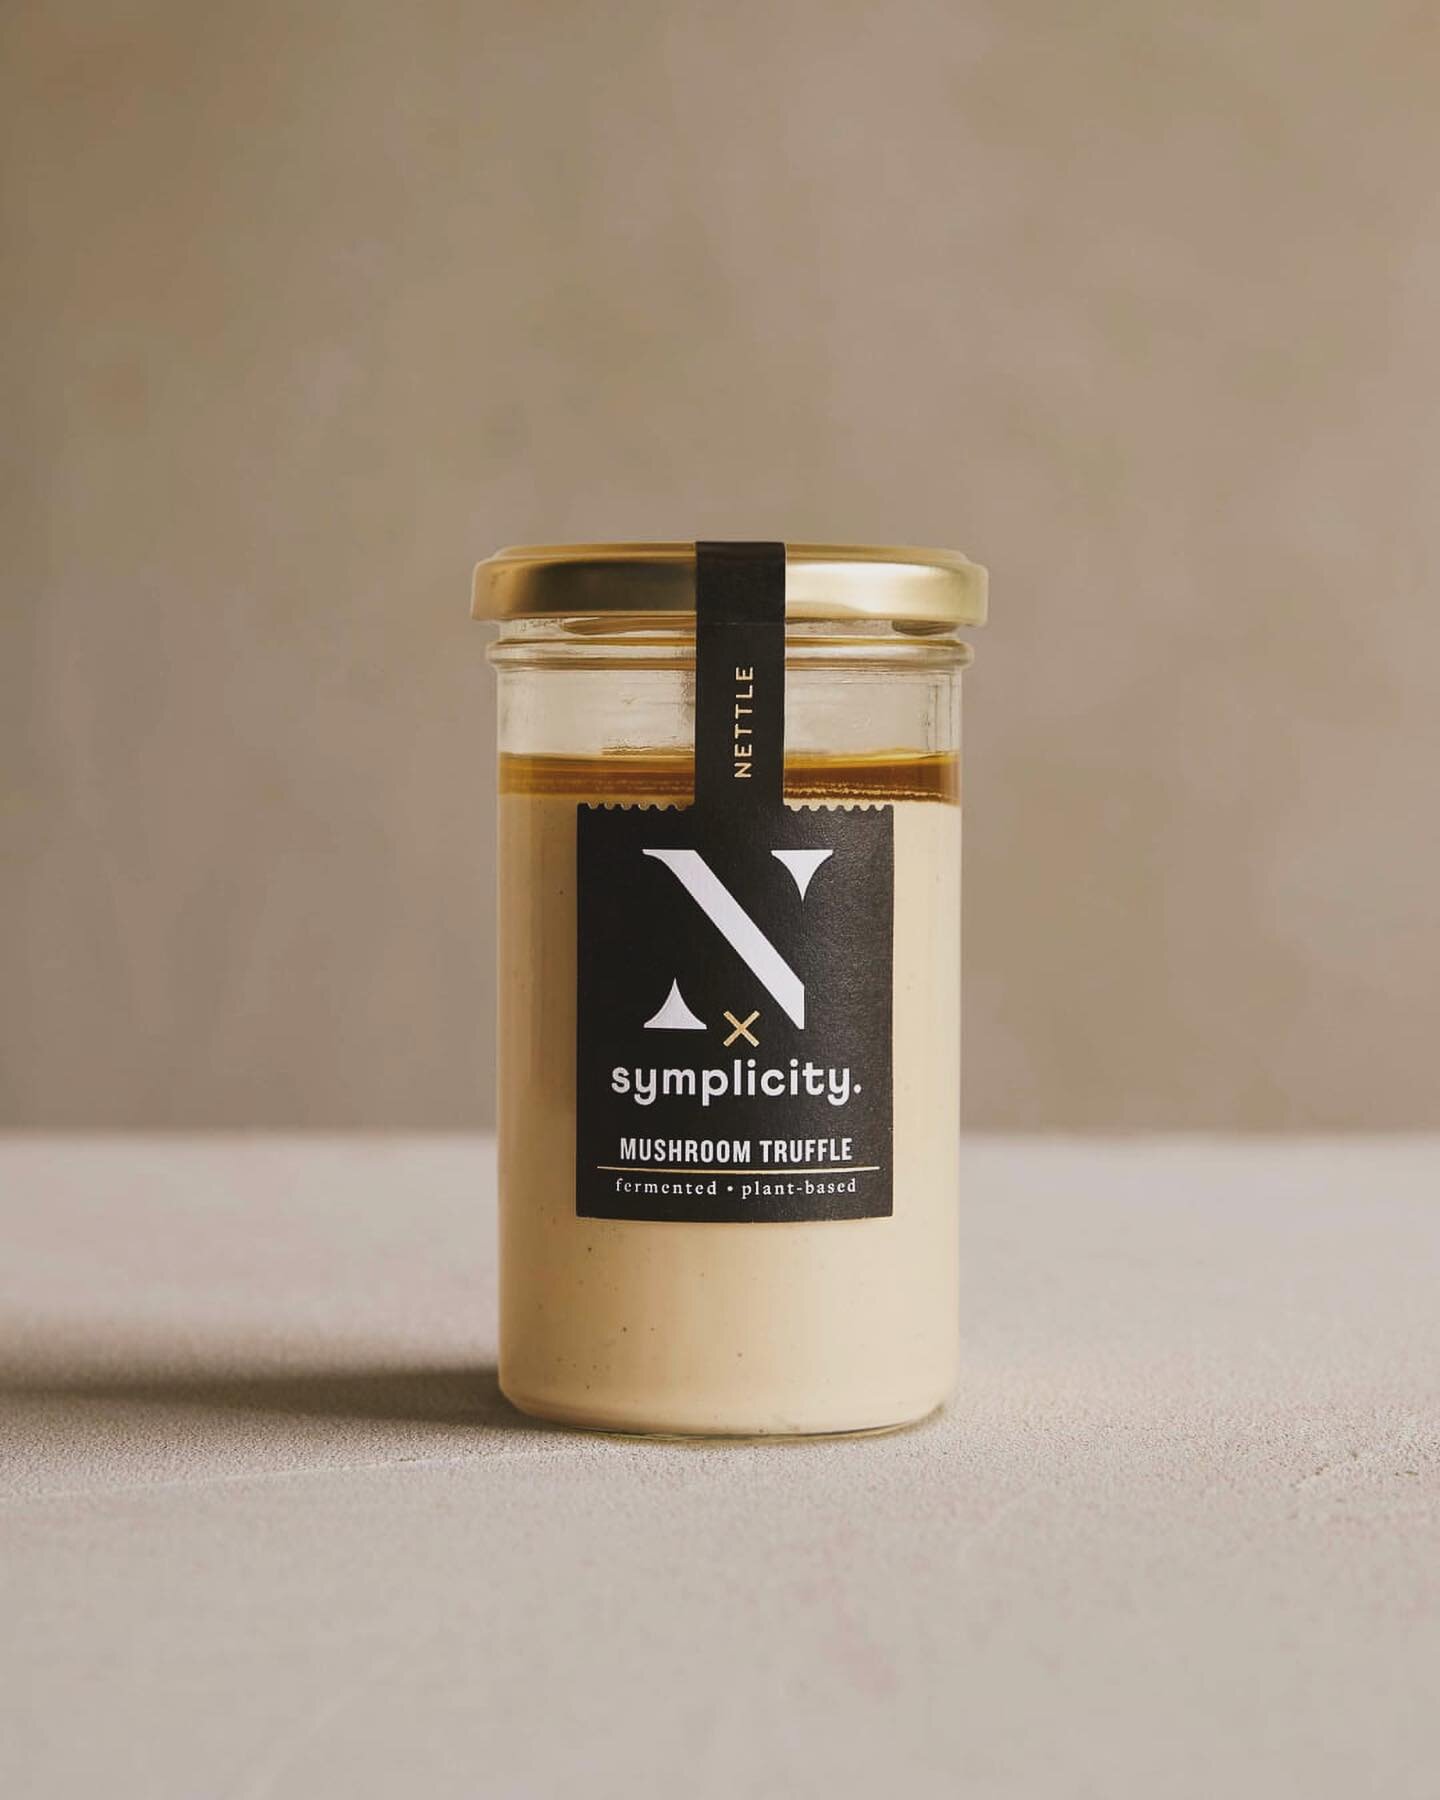 Hello there friends, meet Nettle. 

We met the delightful makers of Nettle last year at Herne Hill market and became fast fans of their savoury fermented dips.

We&rsquo;ve added a selection of their organic spreads &amp; condiments to our curated ra